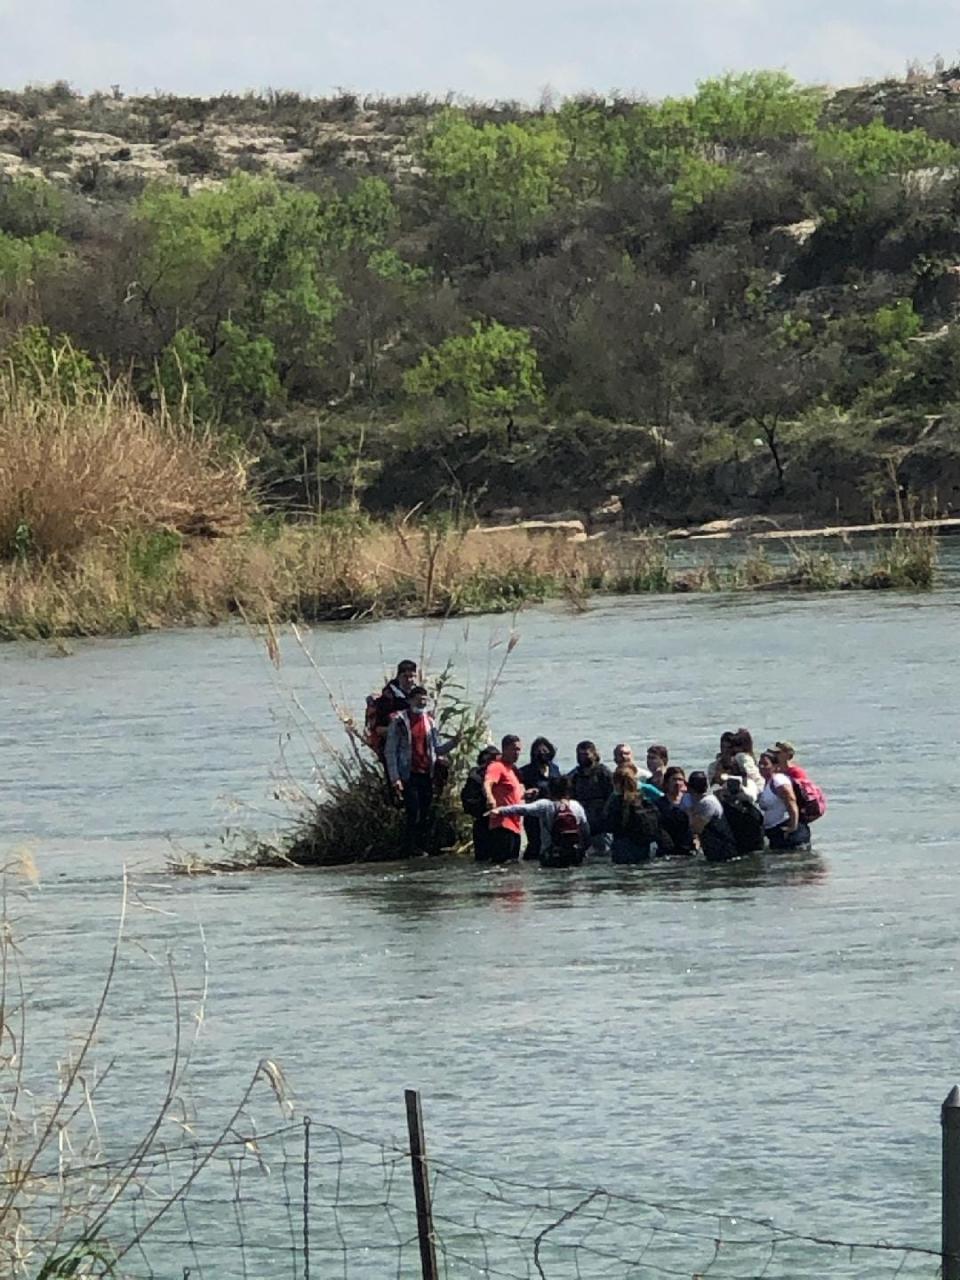 Migrants crossing the Rio Grande into Texas being rounded up by Val Verde County Sheriff deputies in April 2021.